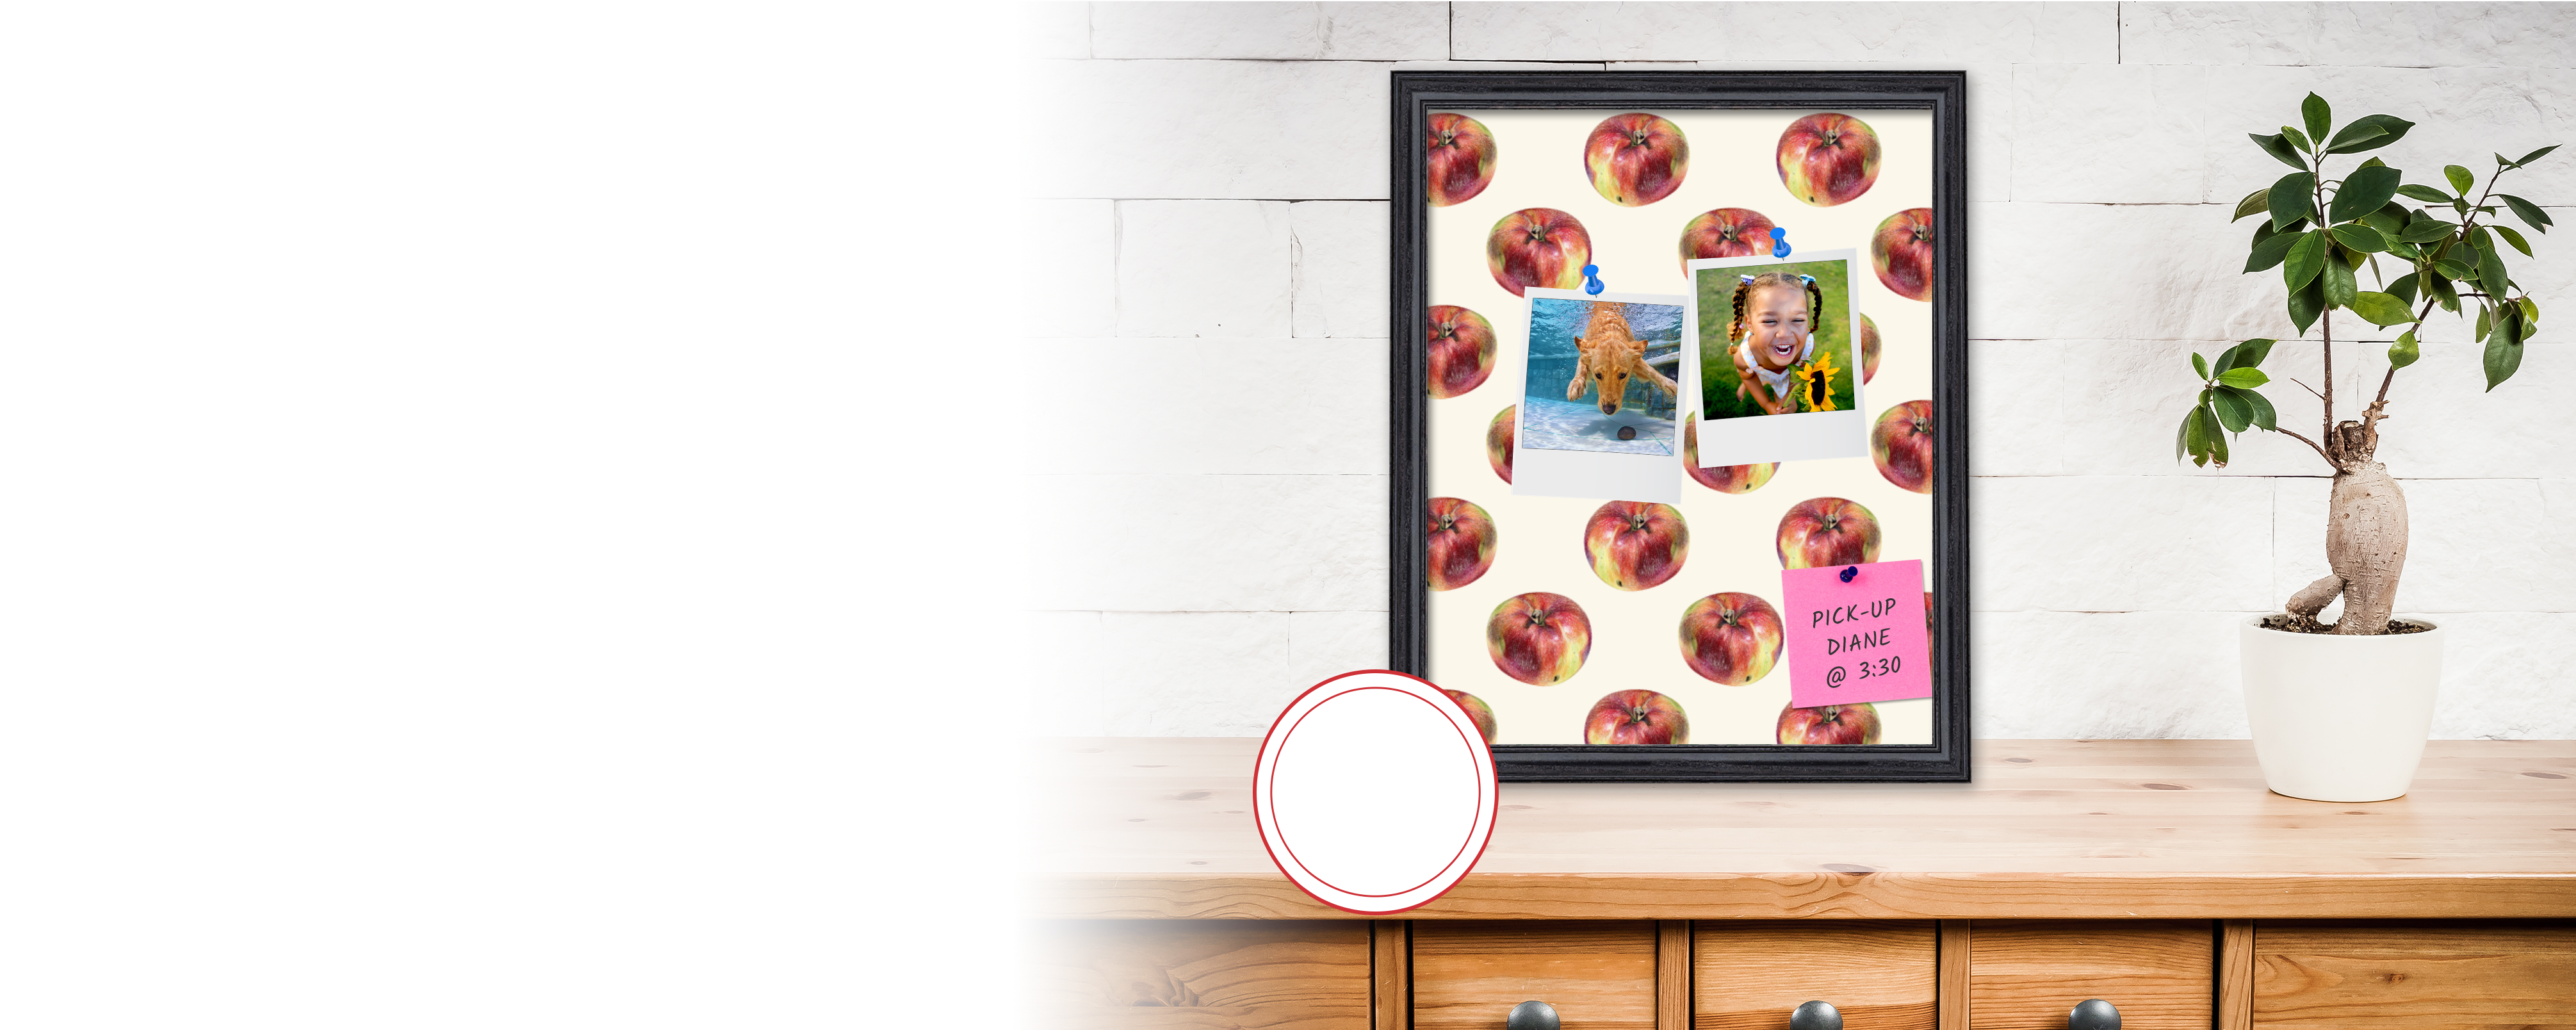 Custom printed cork board lifestyle image with red apple design